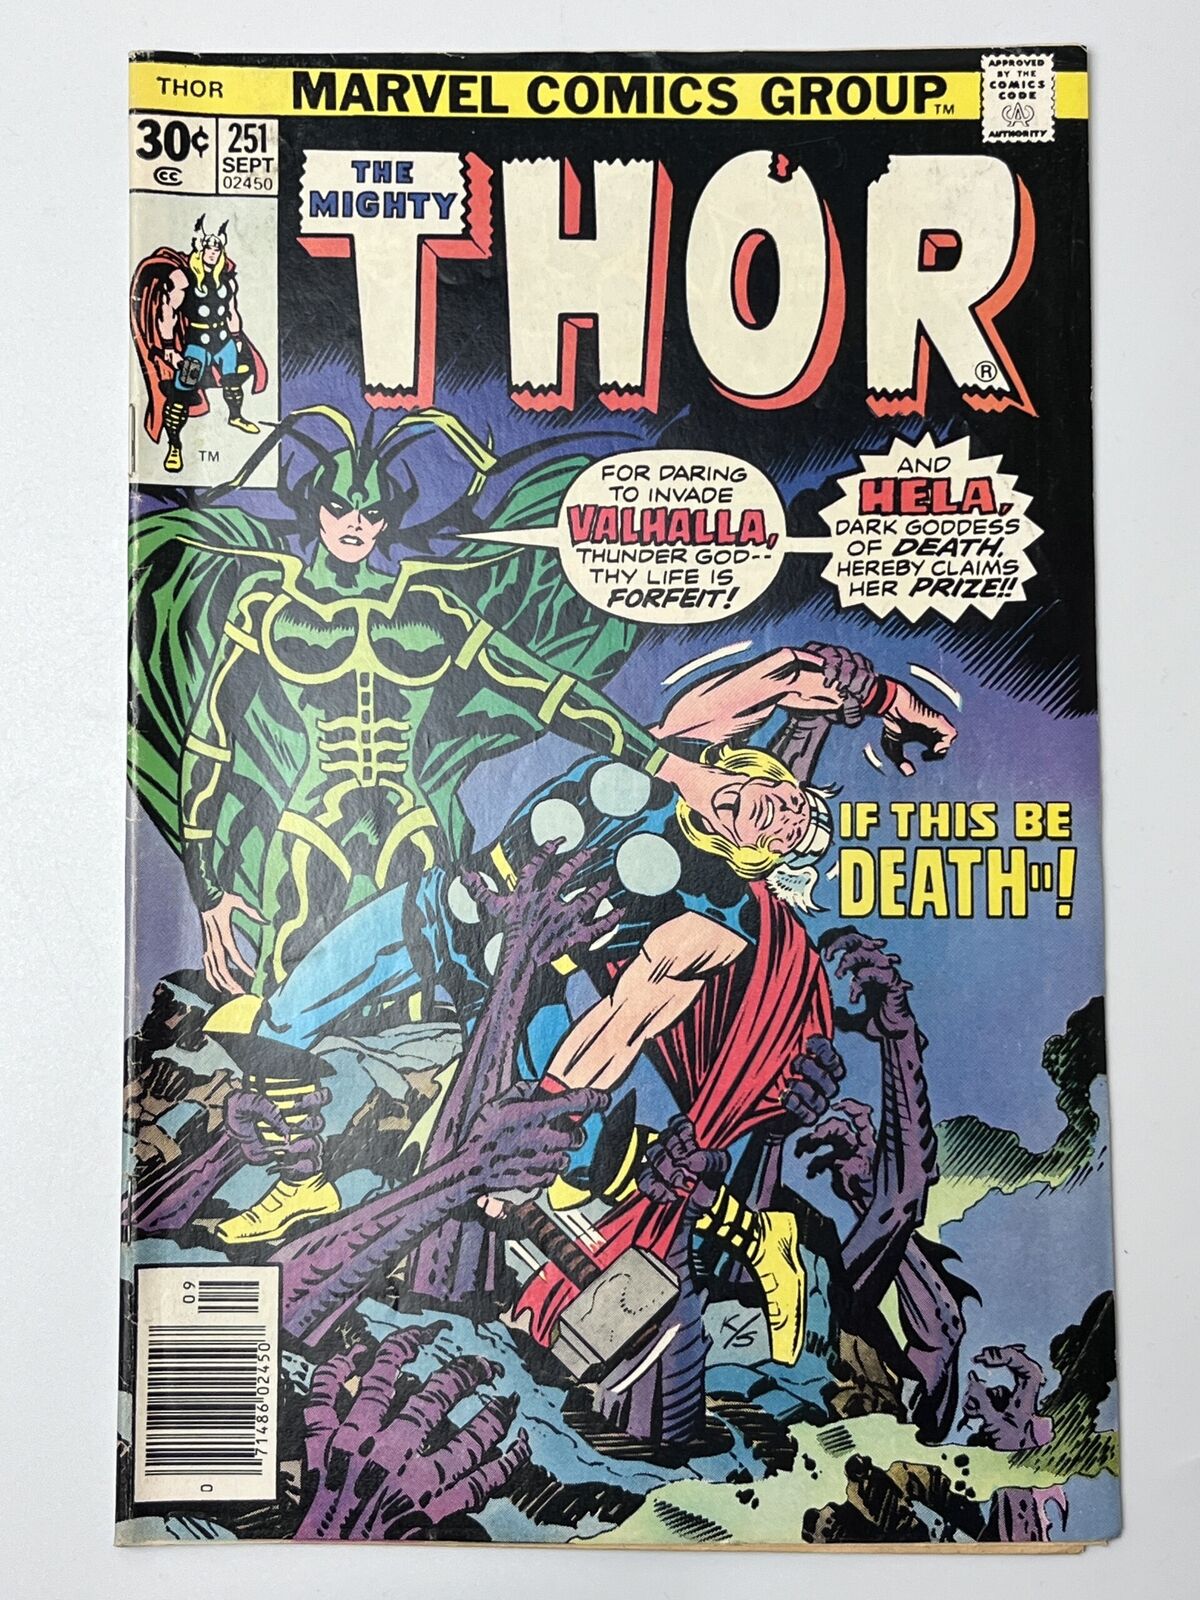 Thor #251 (1976) in 6.0 Fine